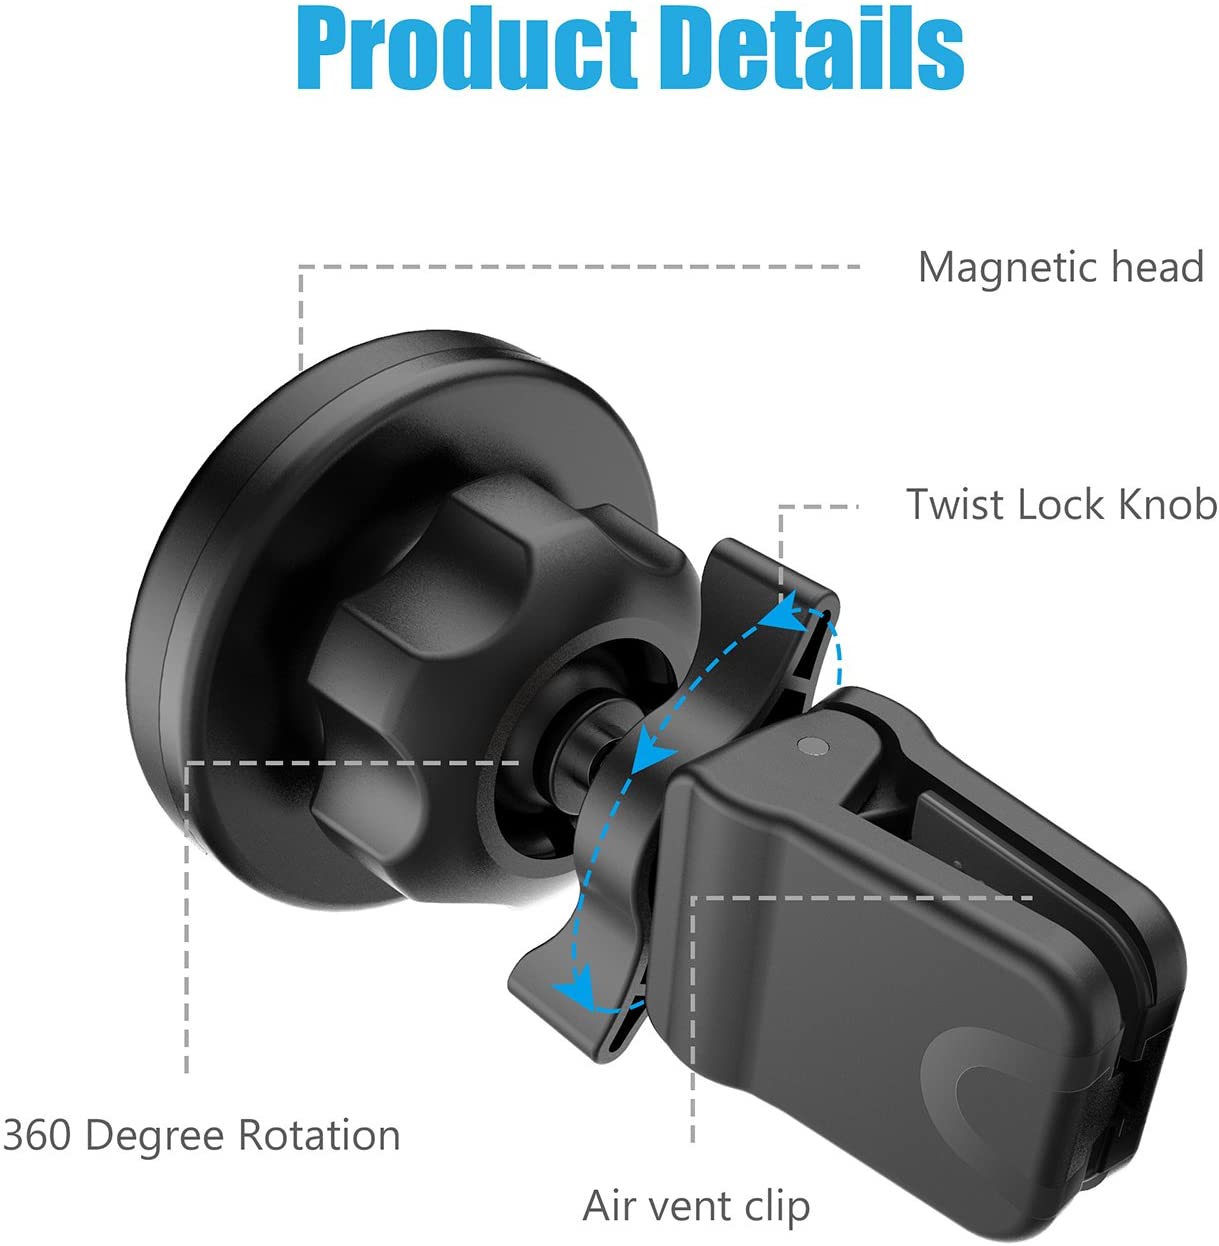 WixGear Universal Twist-lock Mount Air vent Magnetic Car Mount Holder, for Cell Phones and Mini Tablets